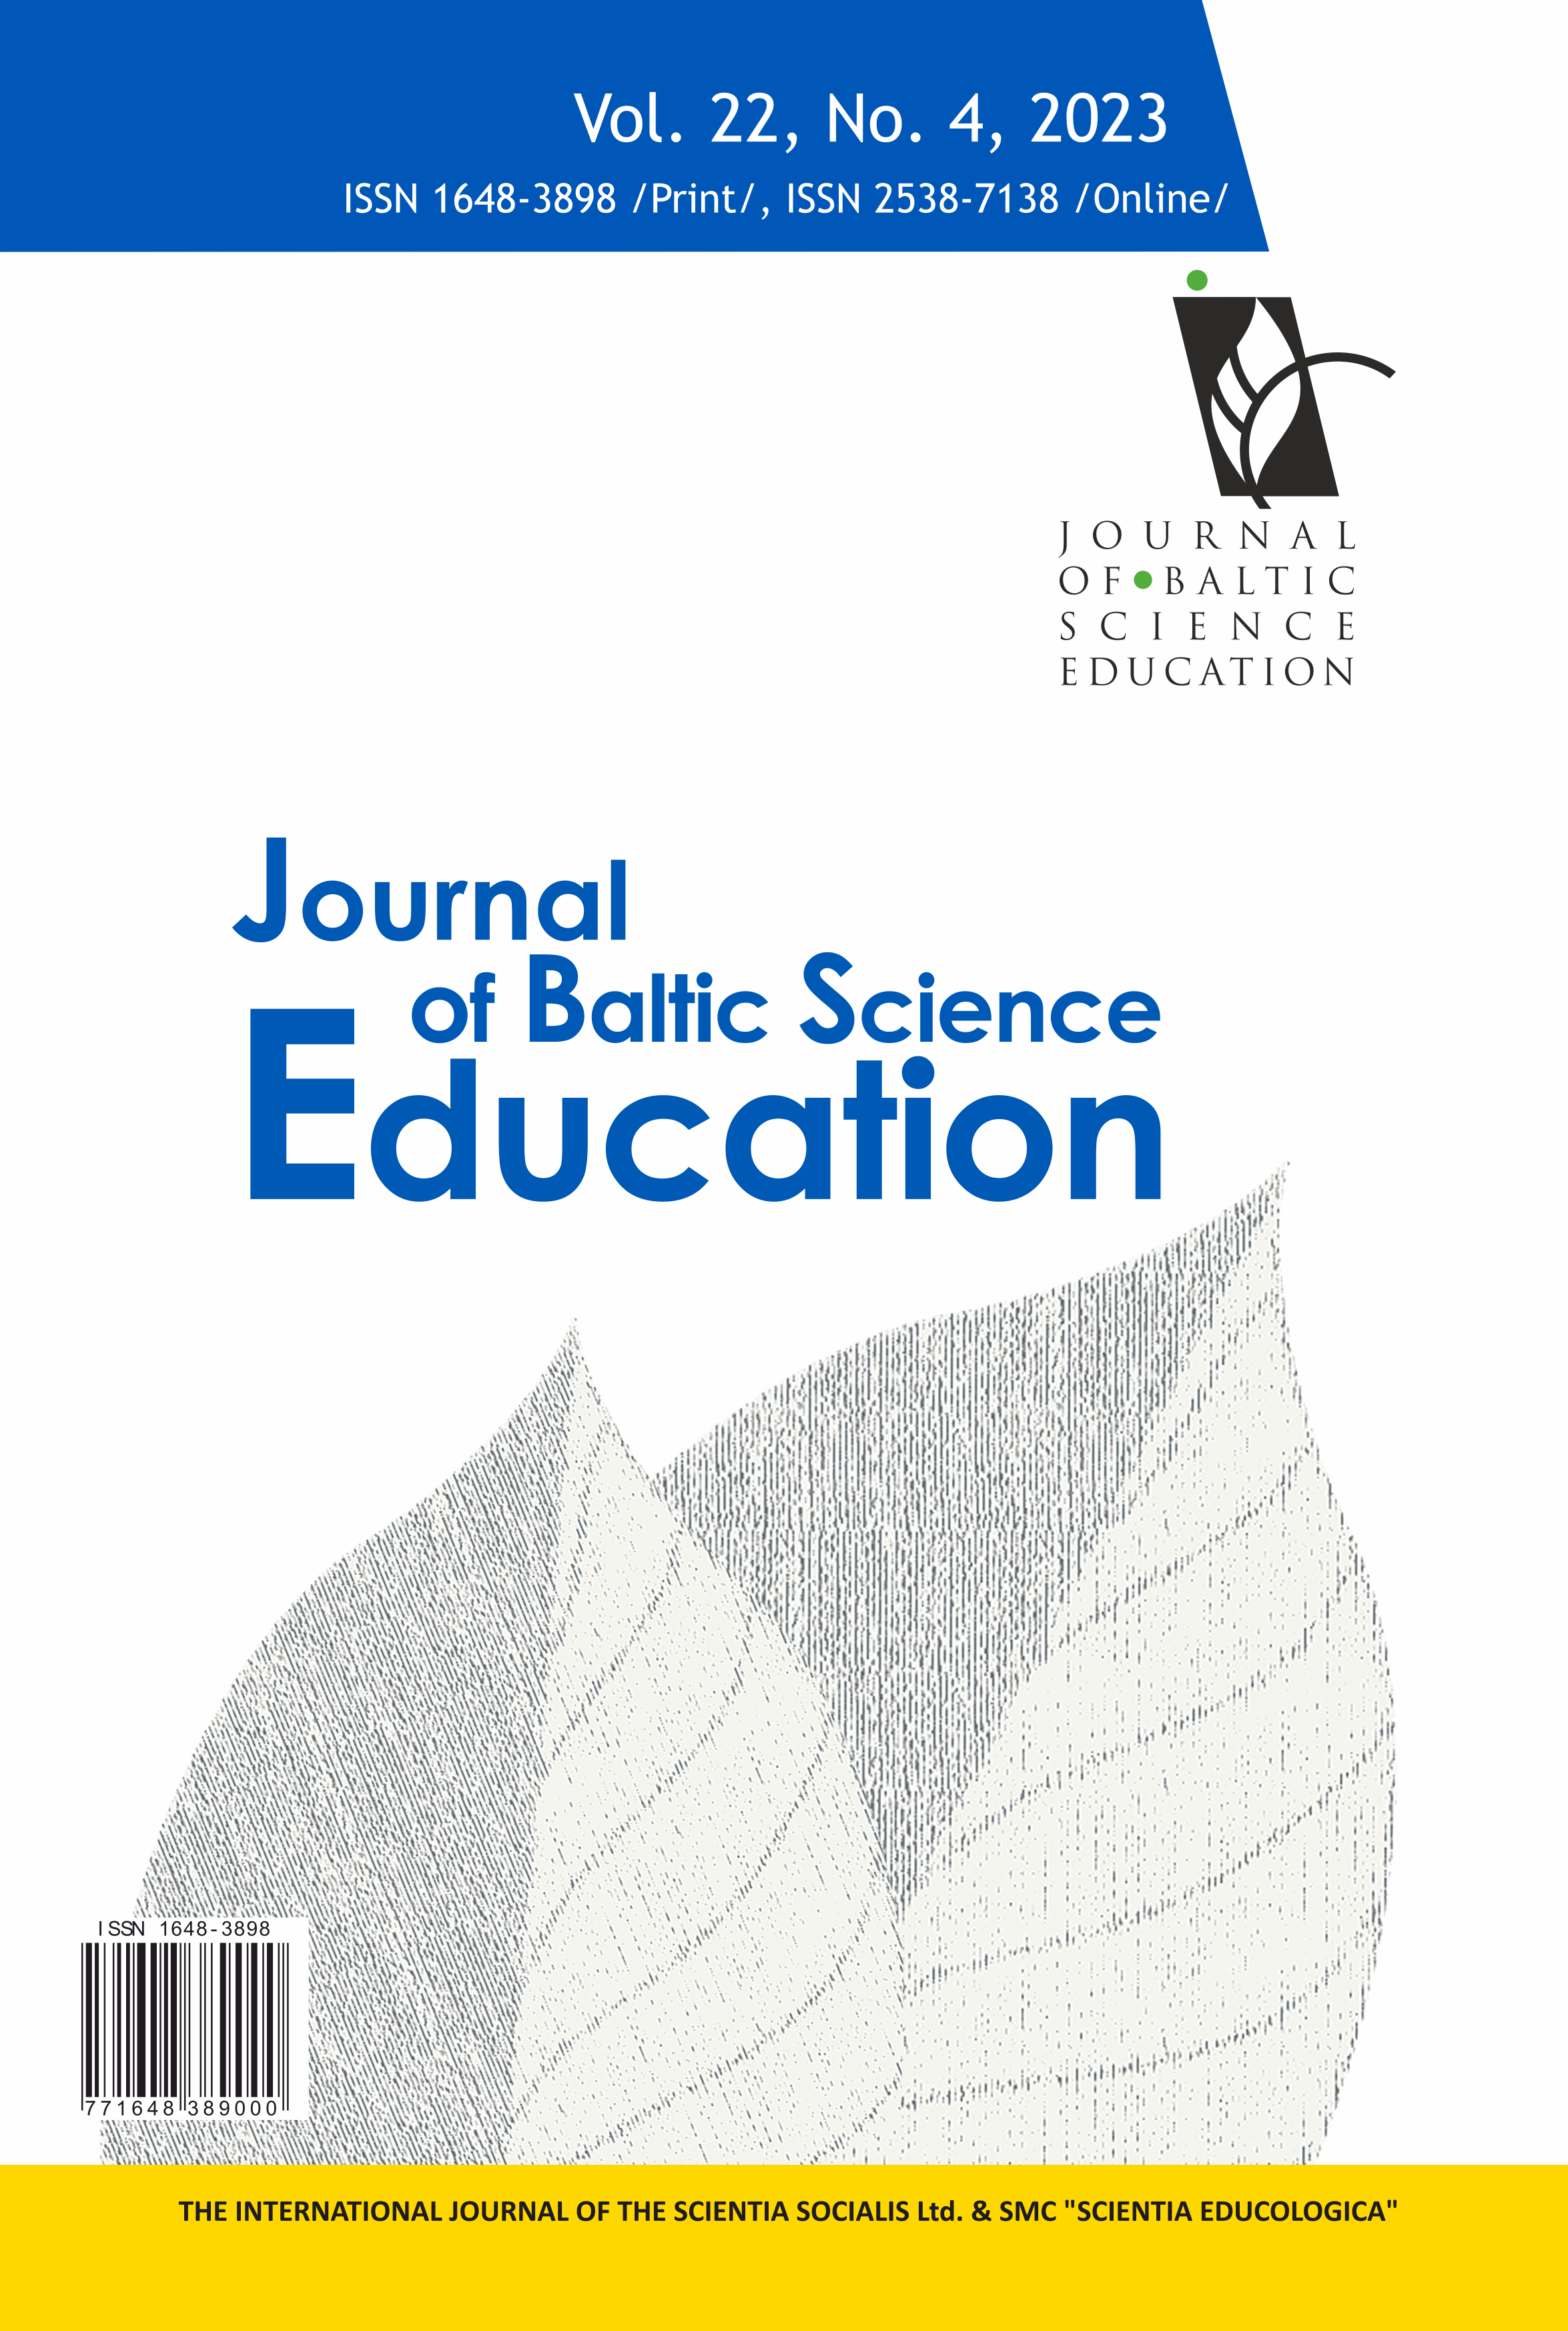 EFFECTS OF LEARNER-CENTERED INTERVENTIONS IN SCIENCE LEARNING: COMPARING EYE MOVEMENT IN EYE MOVEMENT MODELING EXAMPLES AND PROMPTING Cover Image